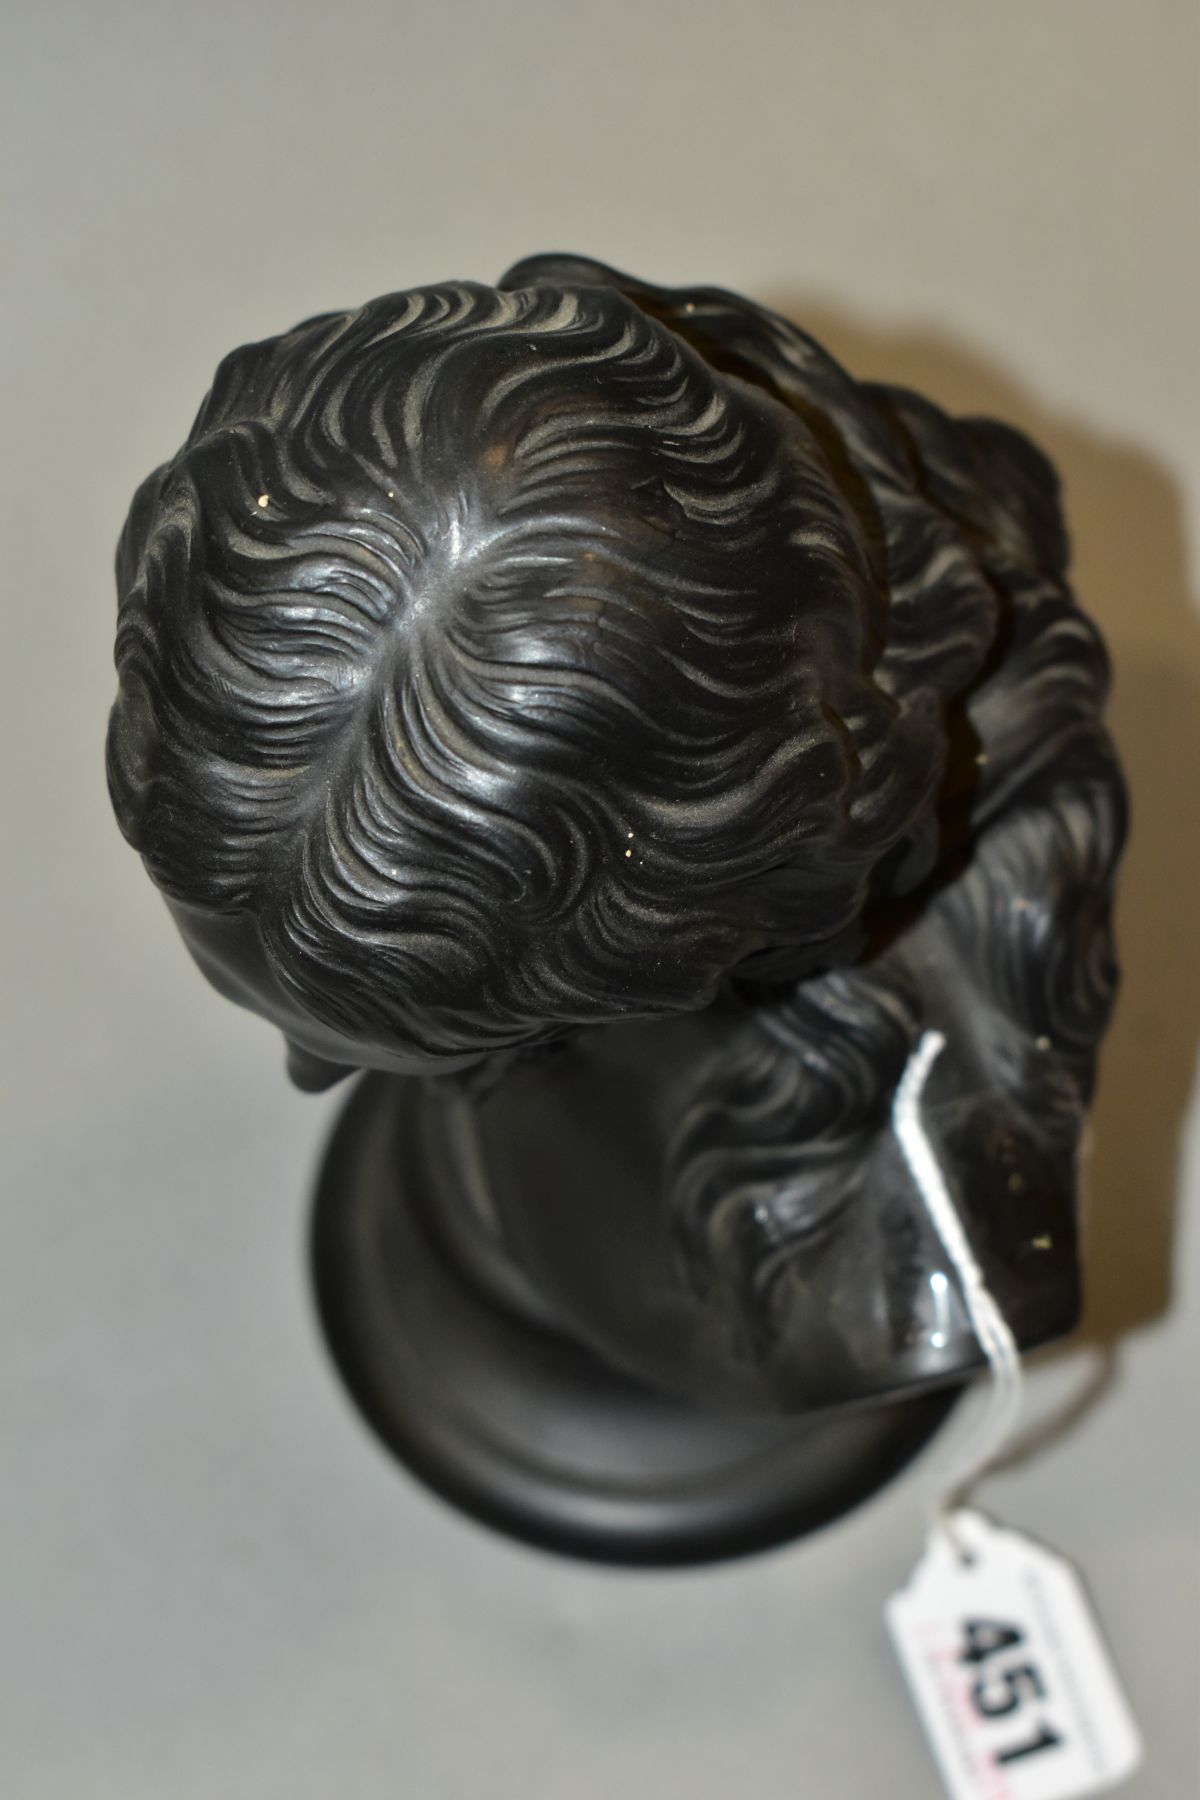 A LATE 19TH CENTURY WEDGWOOD BLACK BASALT BUST OF JESUS CHRIST, impressed marks to back of bust - Image 5 of 6